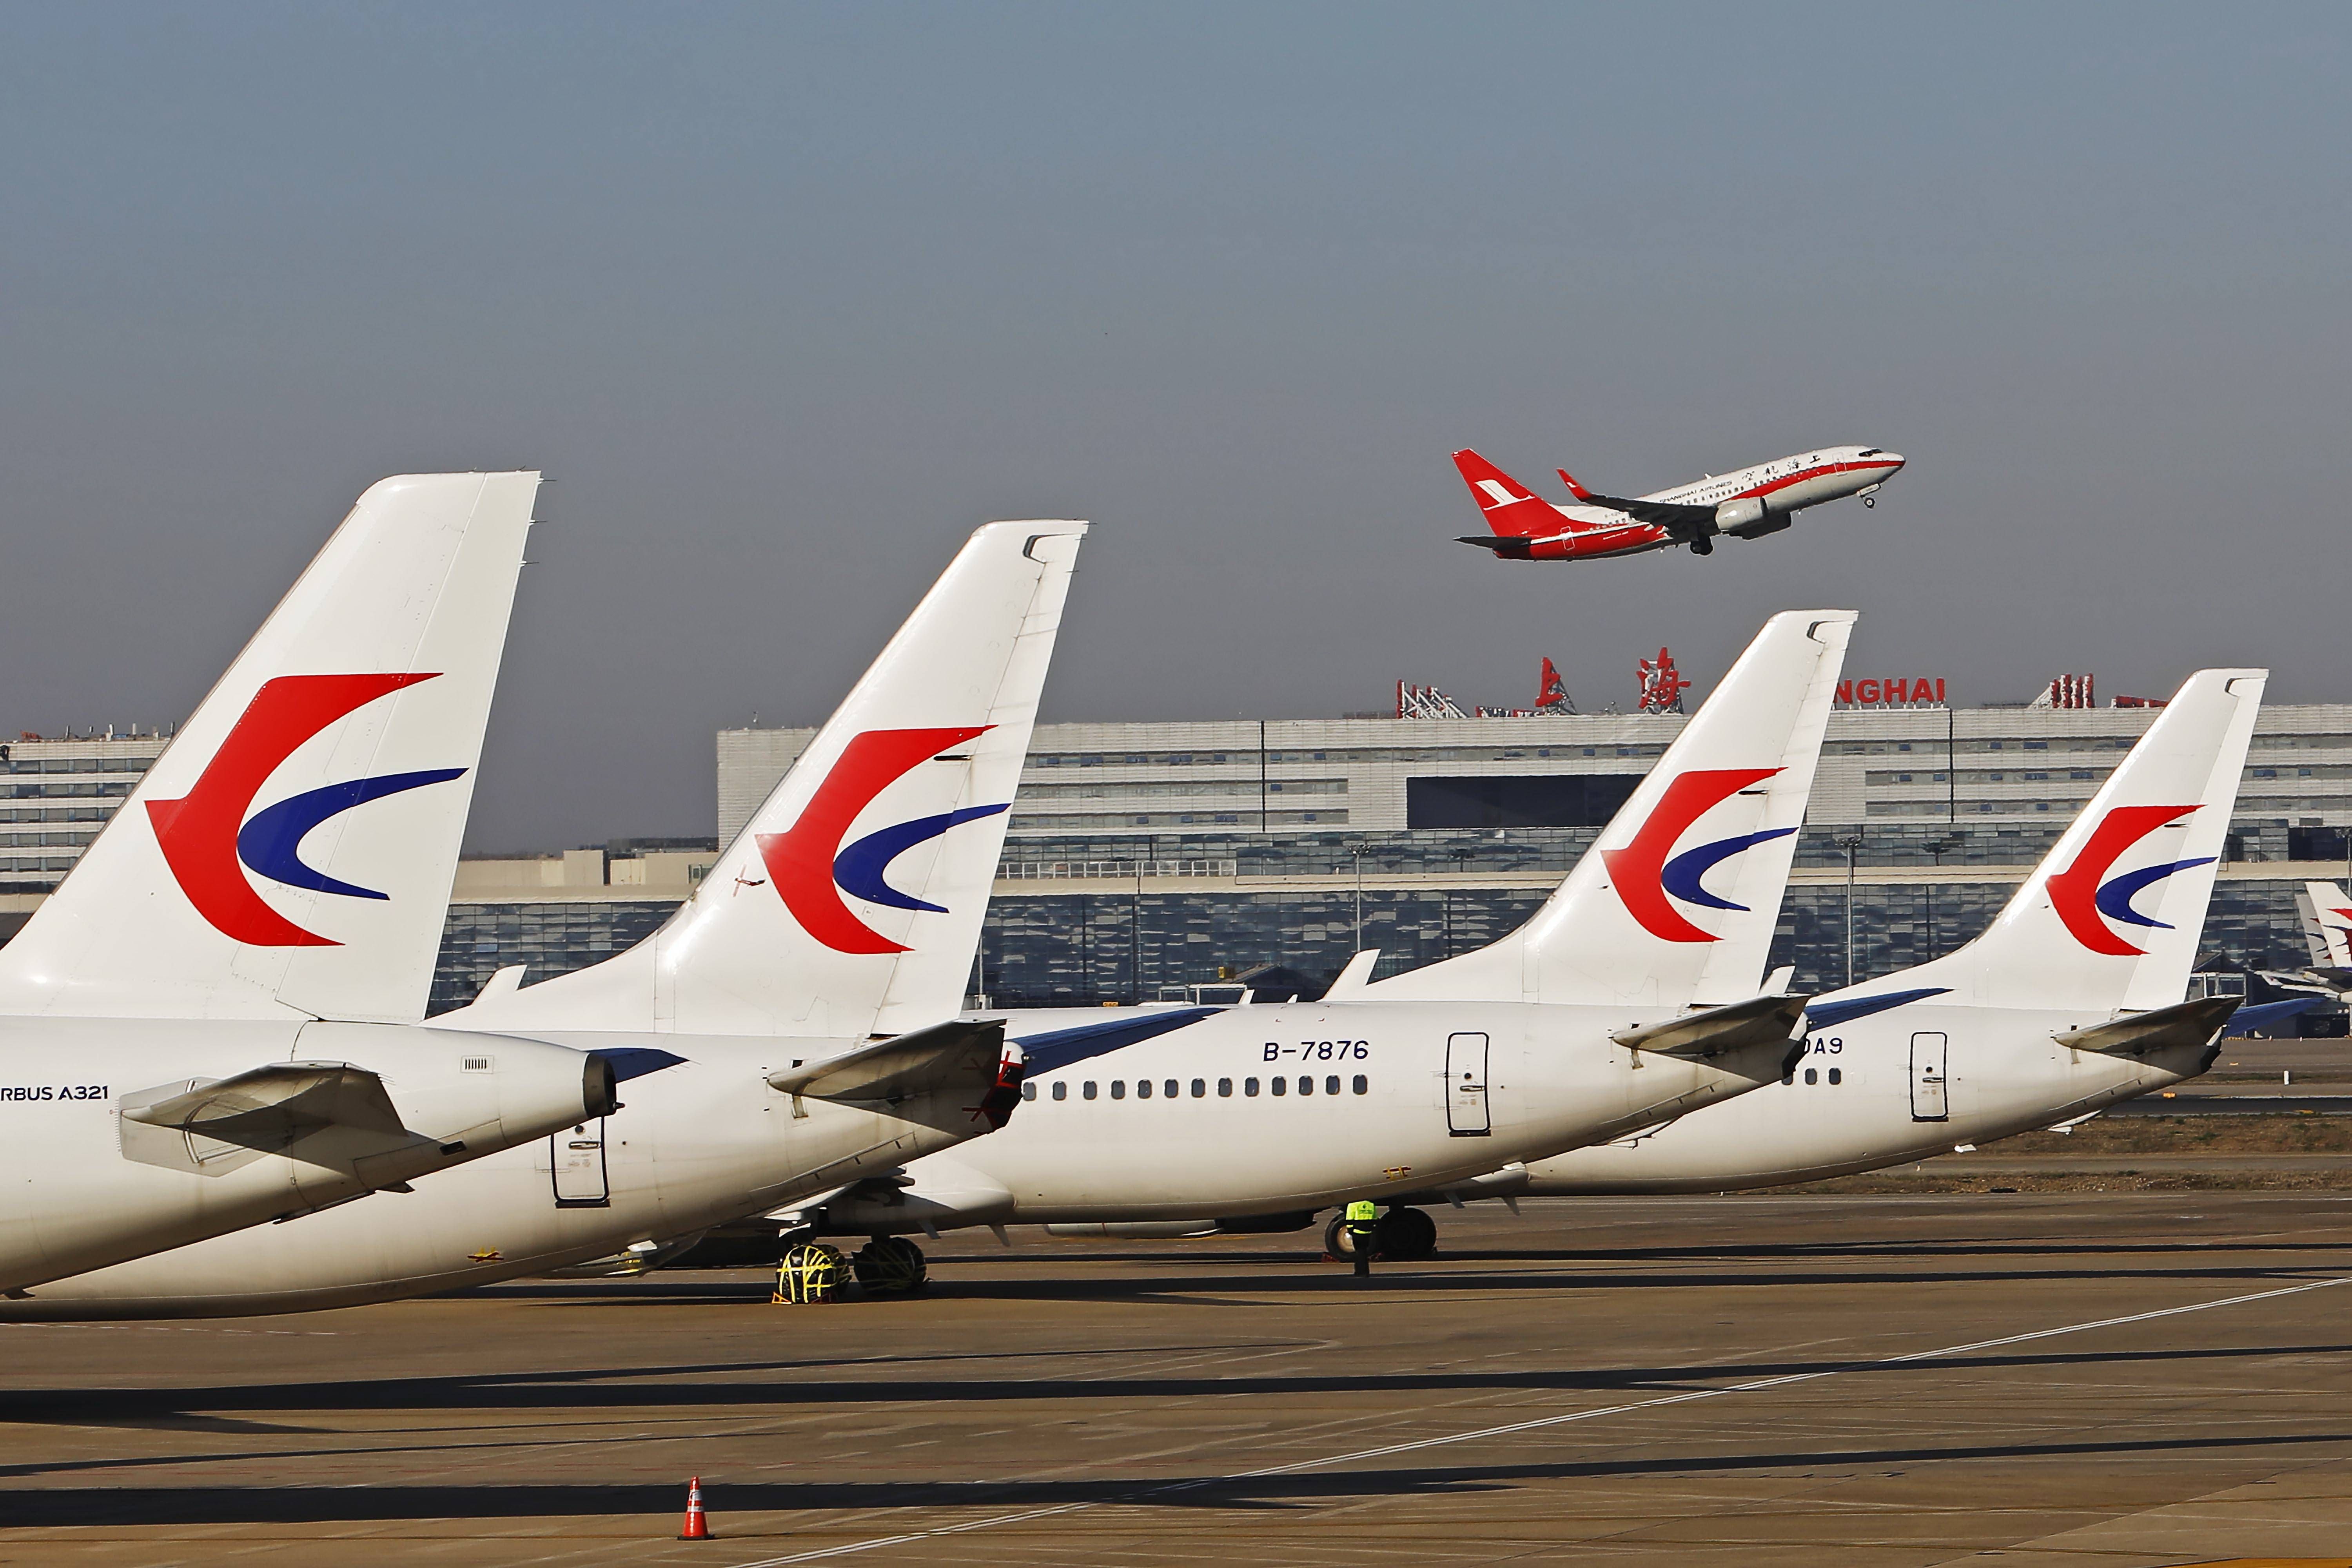 Several China Eastern Aircraft parked on an airport apron.